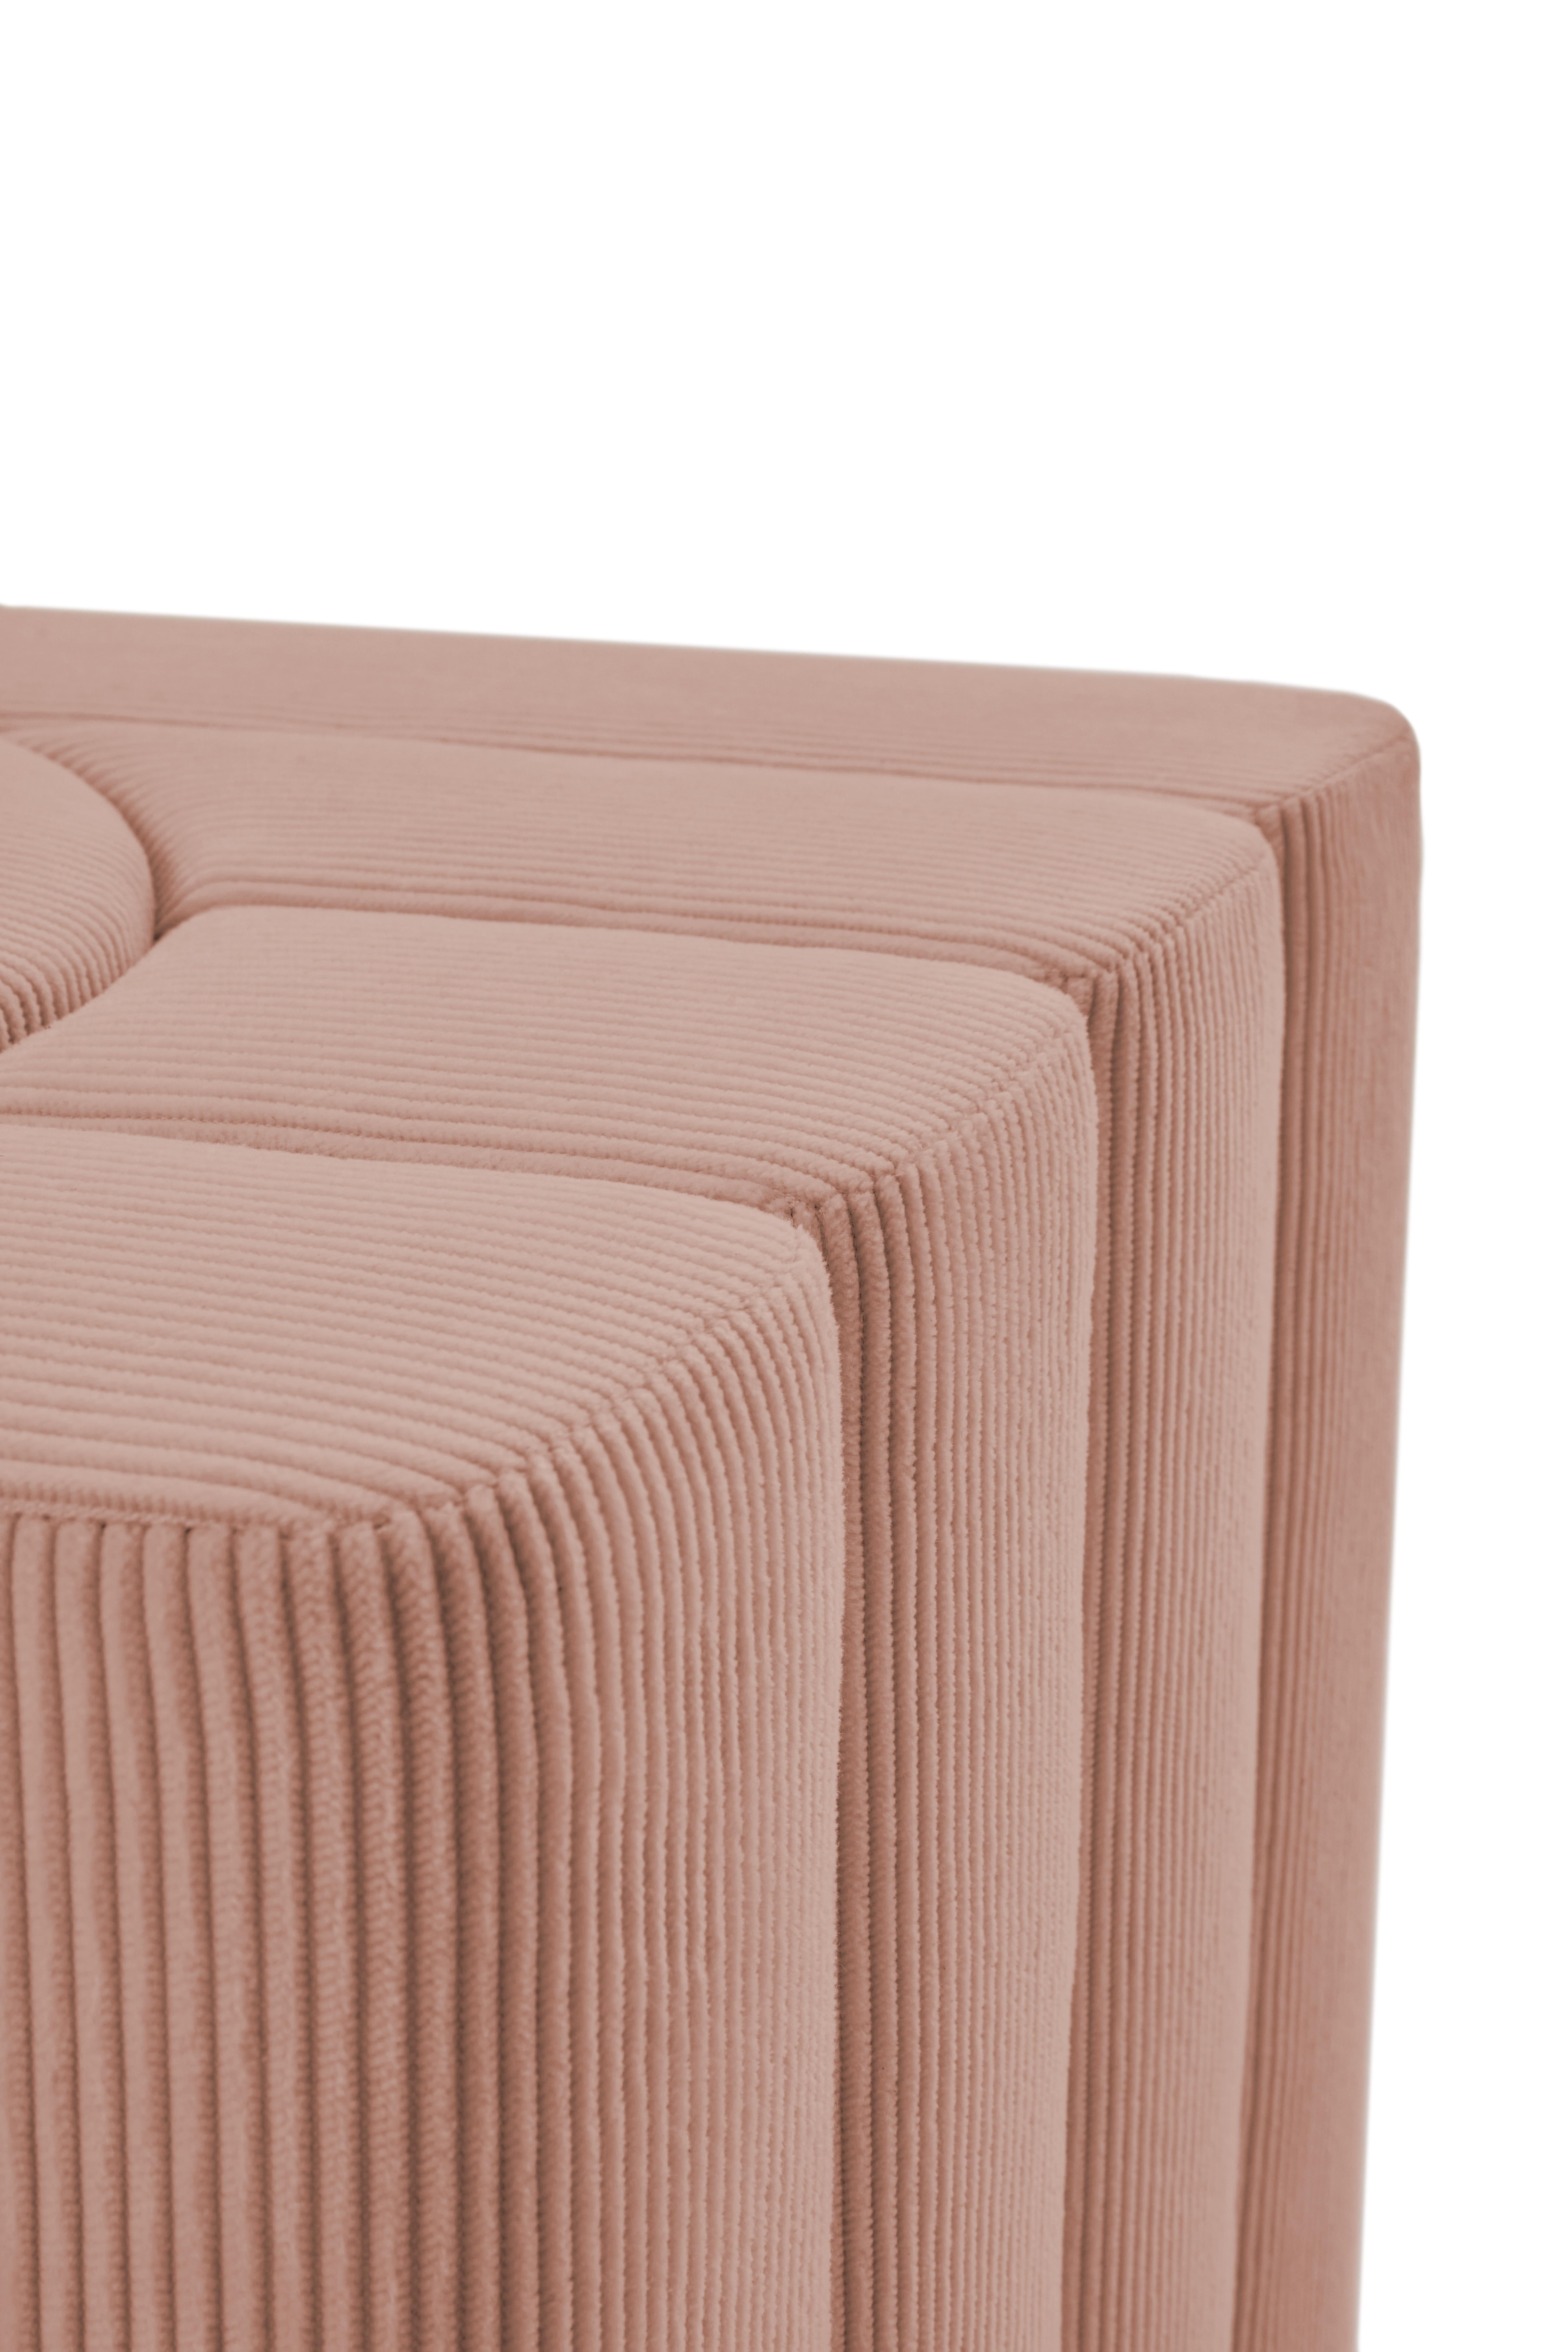 Contemporary 'Prologue' Pink Stool by Marta Delgado, Corded Velveteen For Sale